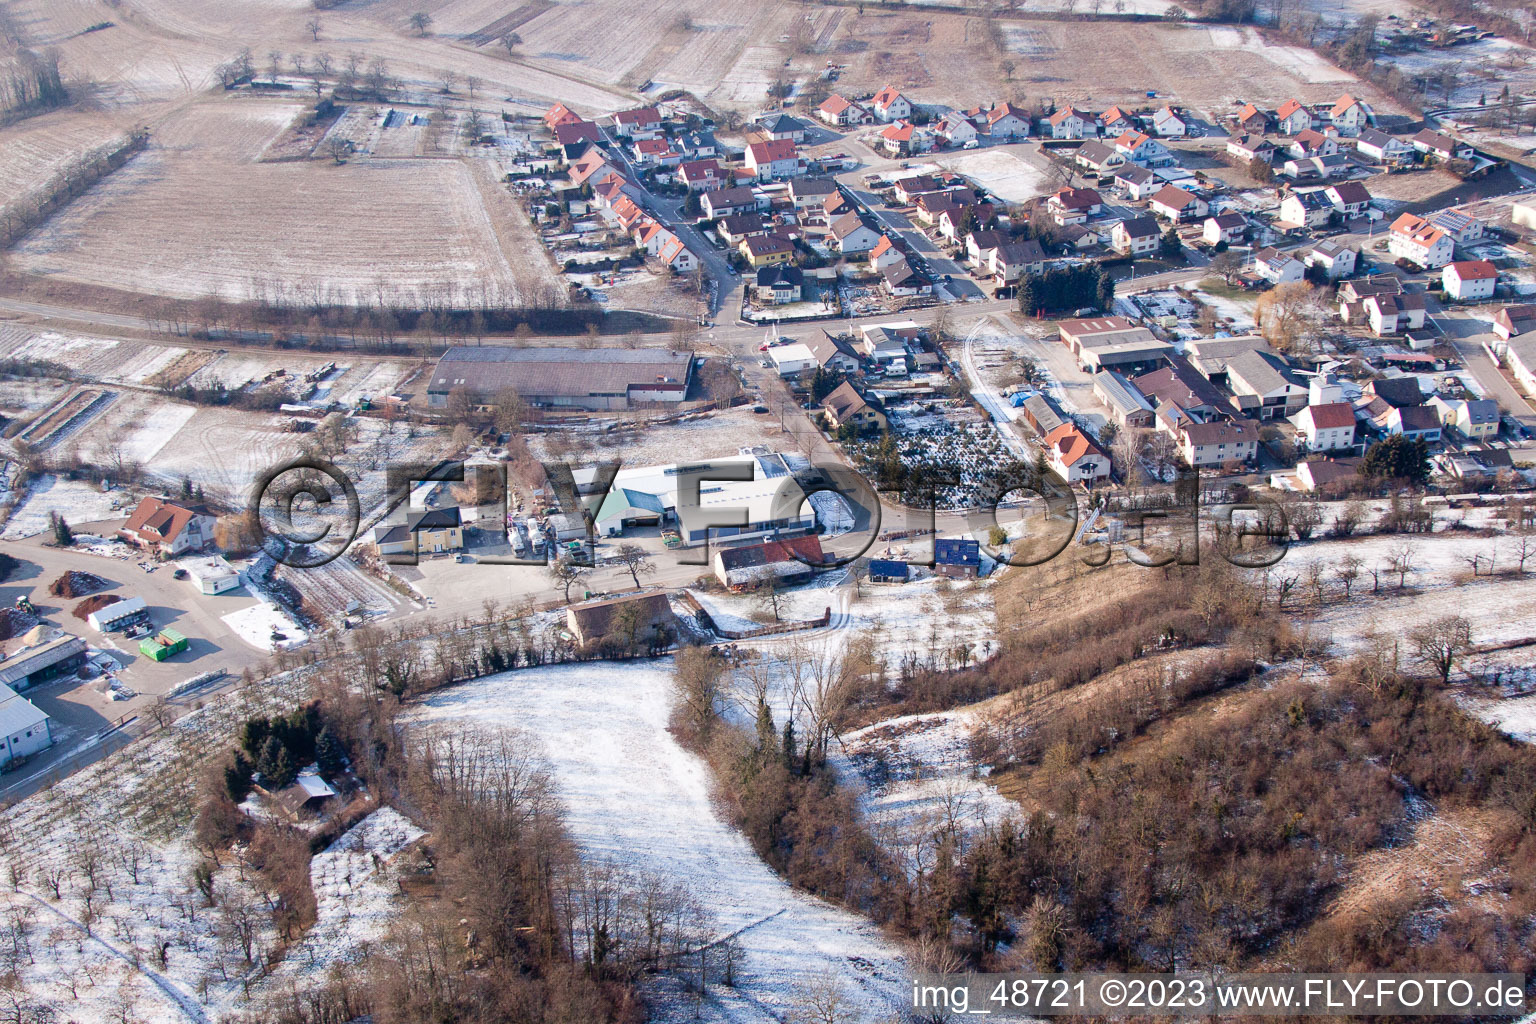 AVN GmbH in Neuenbürg in the state Baden-Wuerttemberg, Germany from above